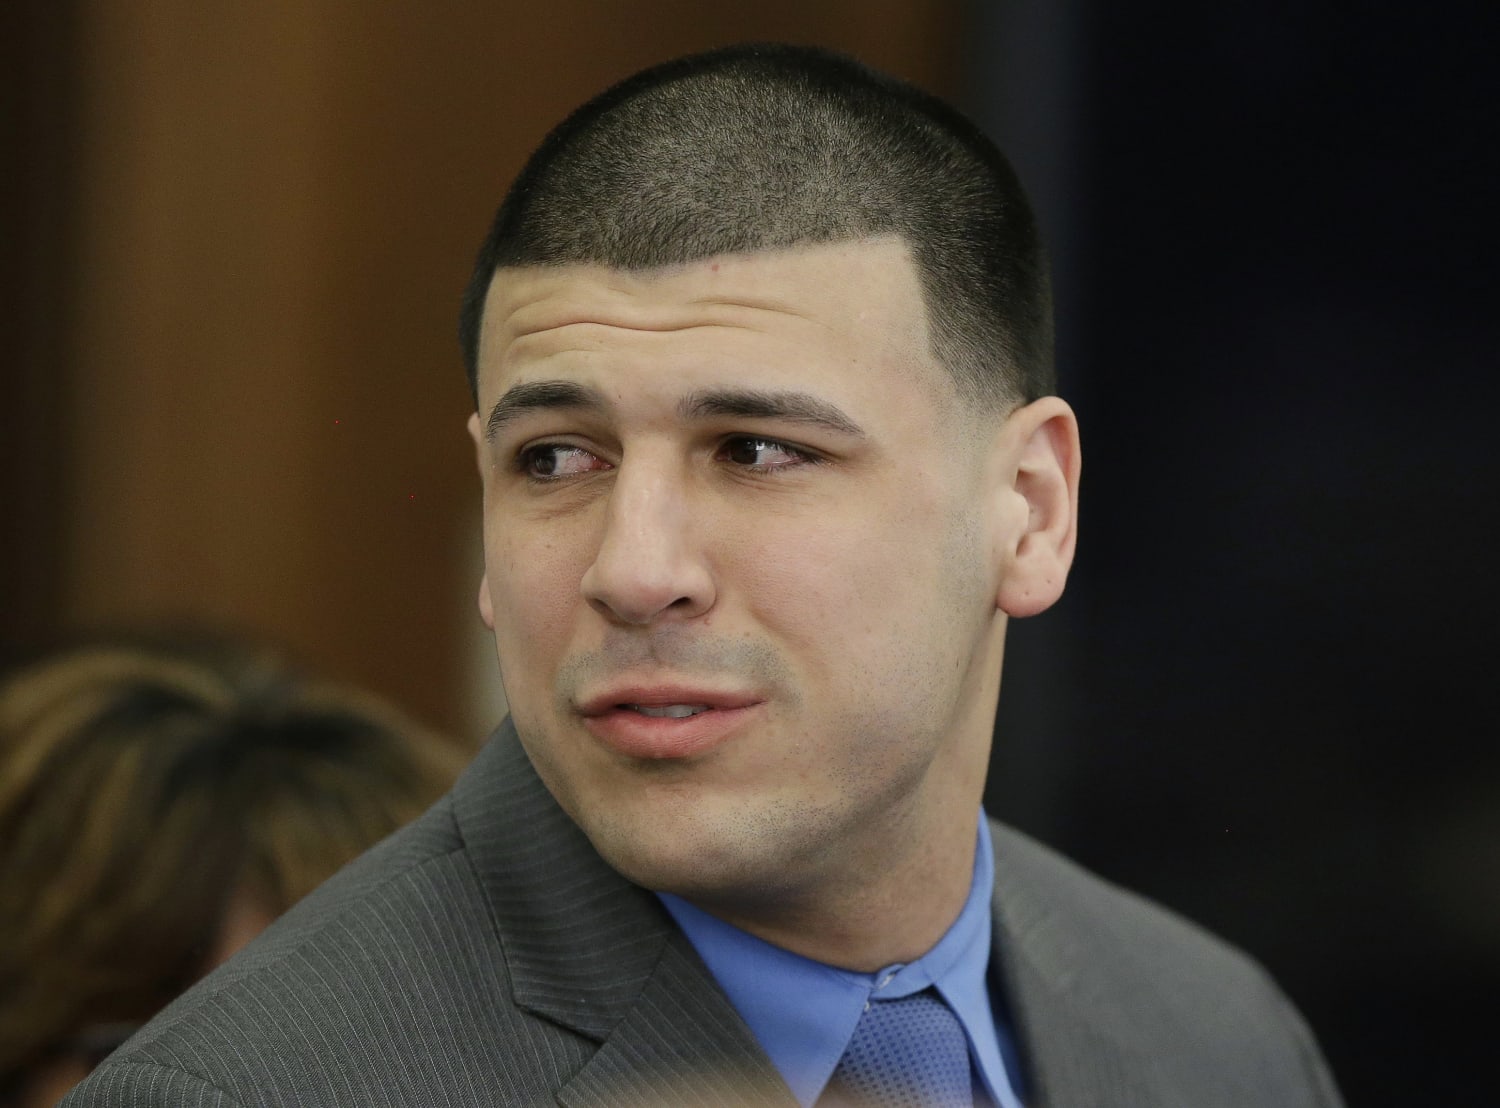 Aaron Hernandez came out to his mother shortly before his suicide, brother  claims - Queerty